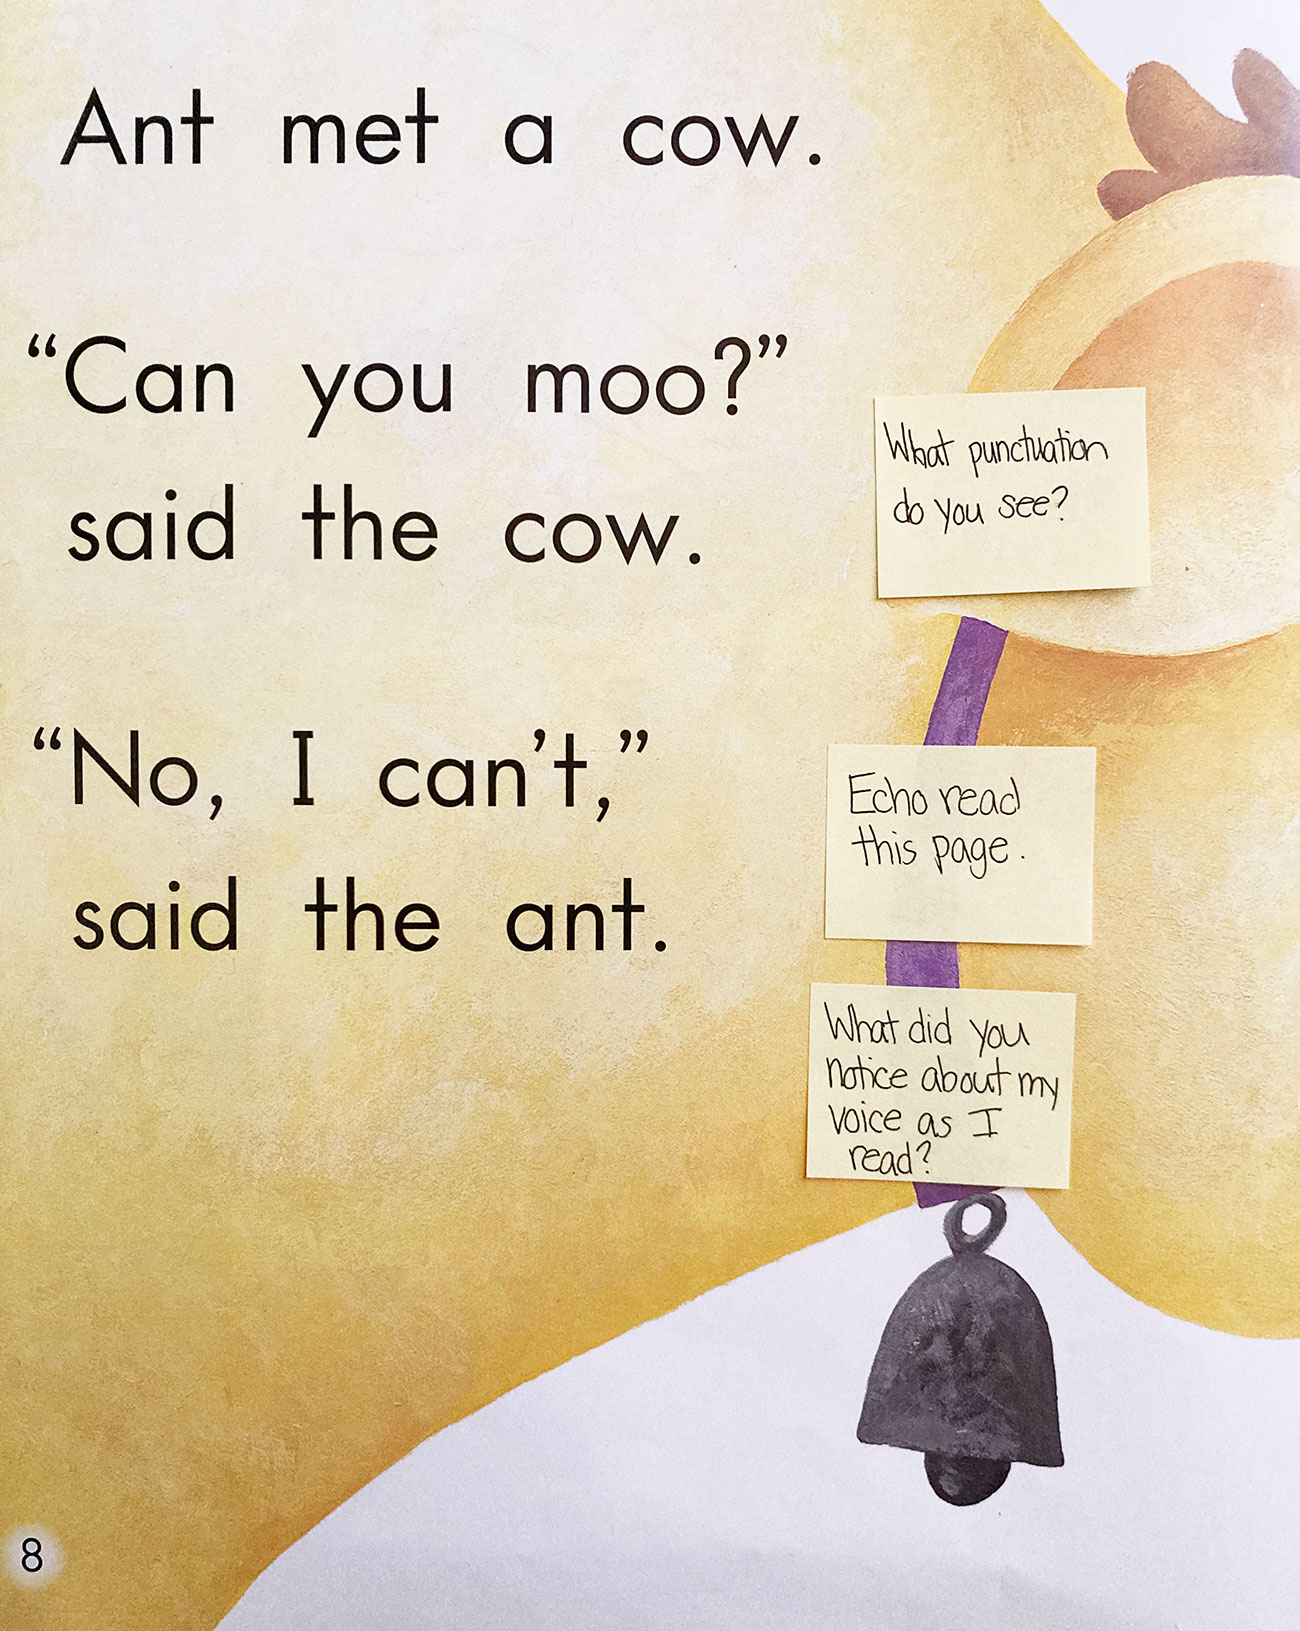 Page from predictable book showing text about a cow and an ant with post-it notes